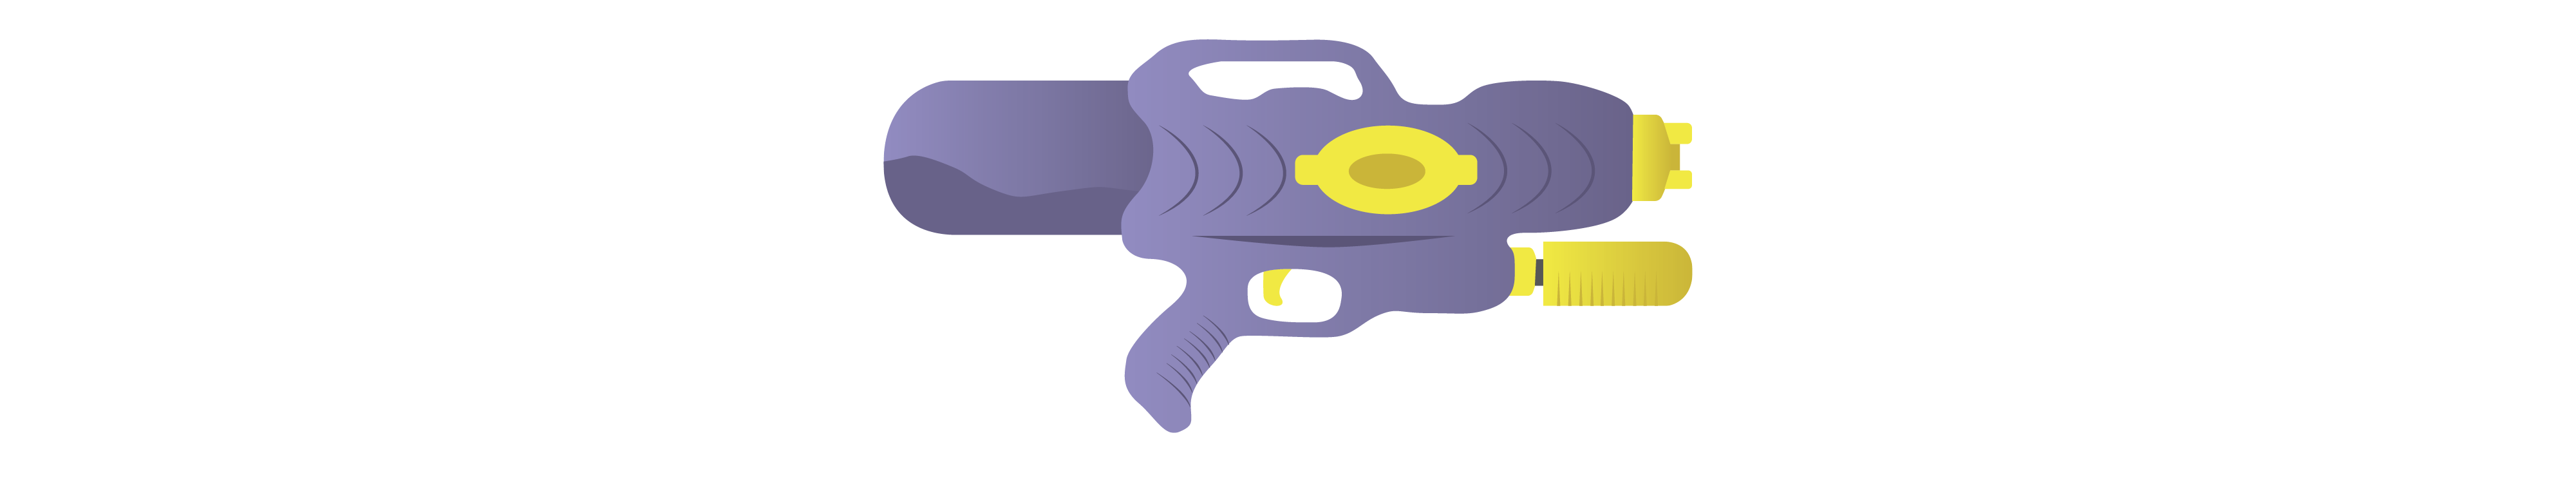 Purple water gun with yellow accent parts.